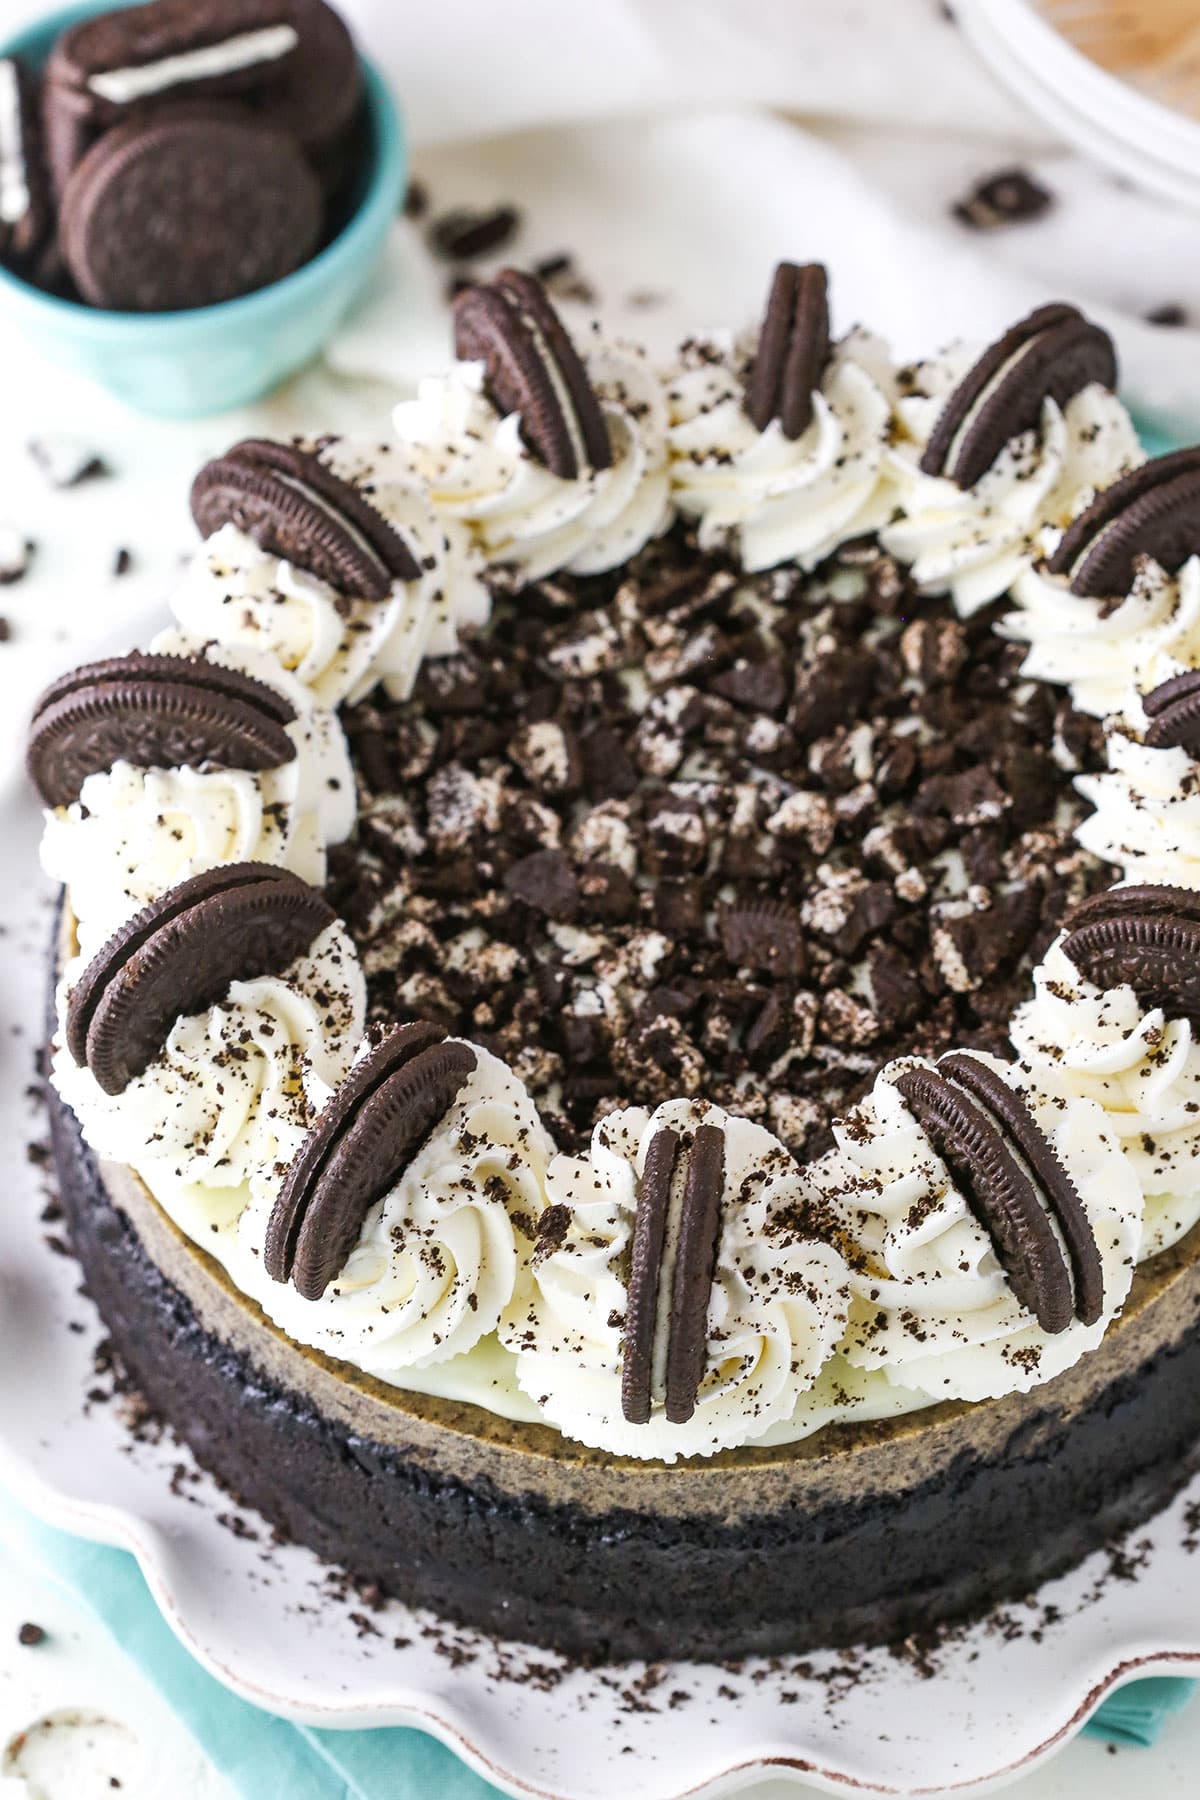 Overhead view of an Oreo Cheesecake on a white cake stand on top of a blue cloth